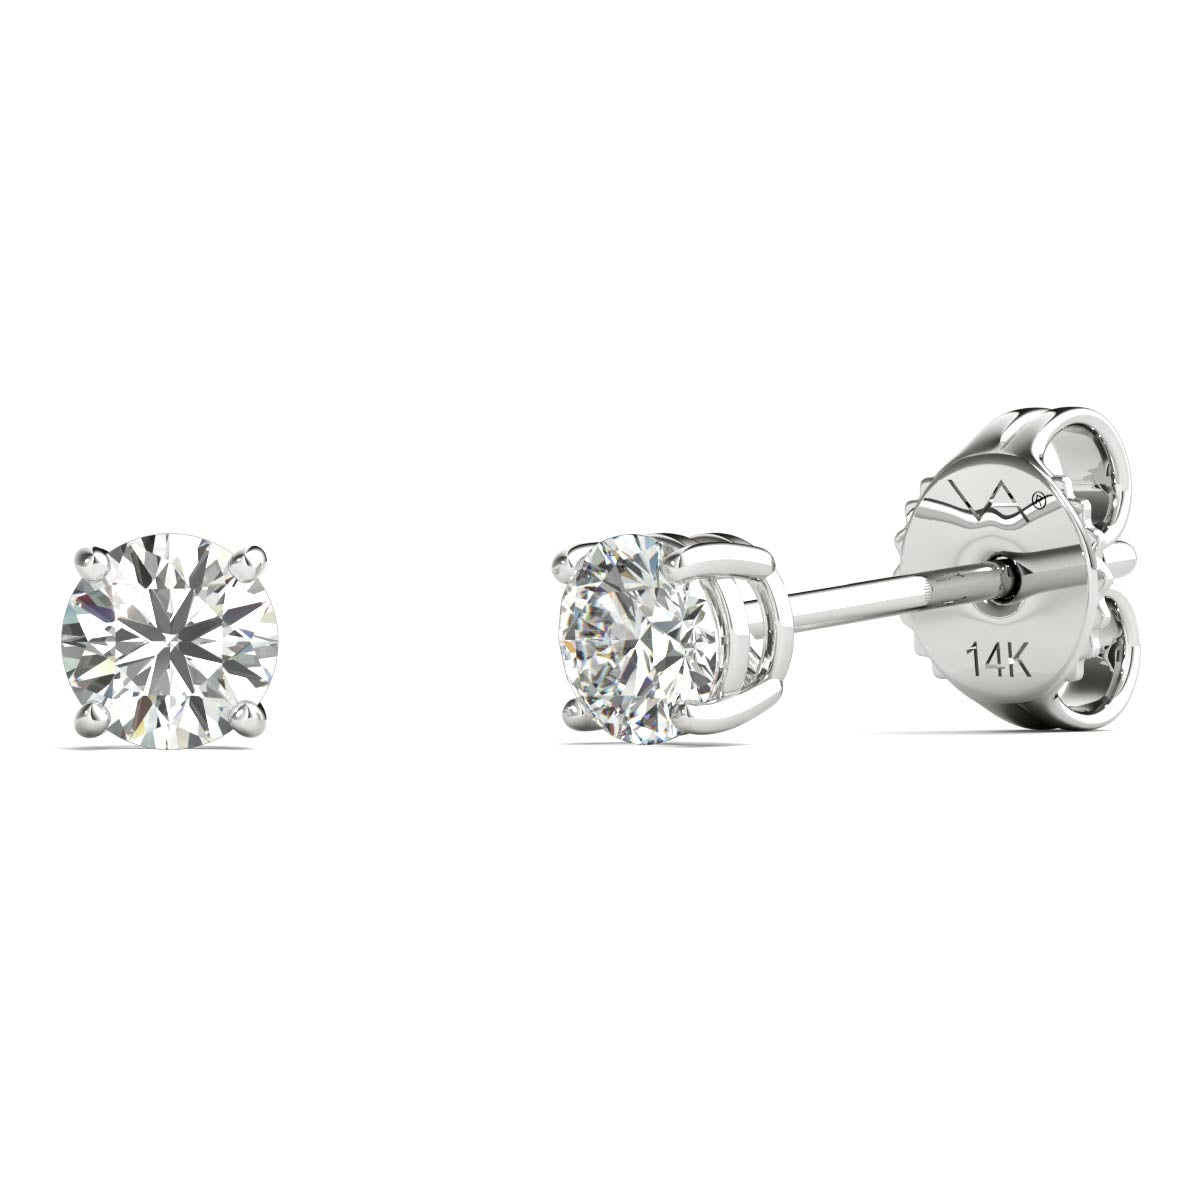 Solitaire Diamond Earrings (1/3 Ct tw, AGS Certified, GH/I1-I2) White Gold